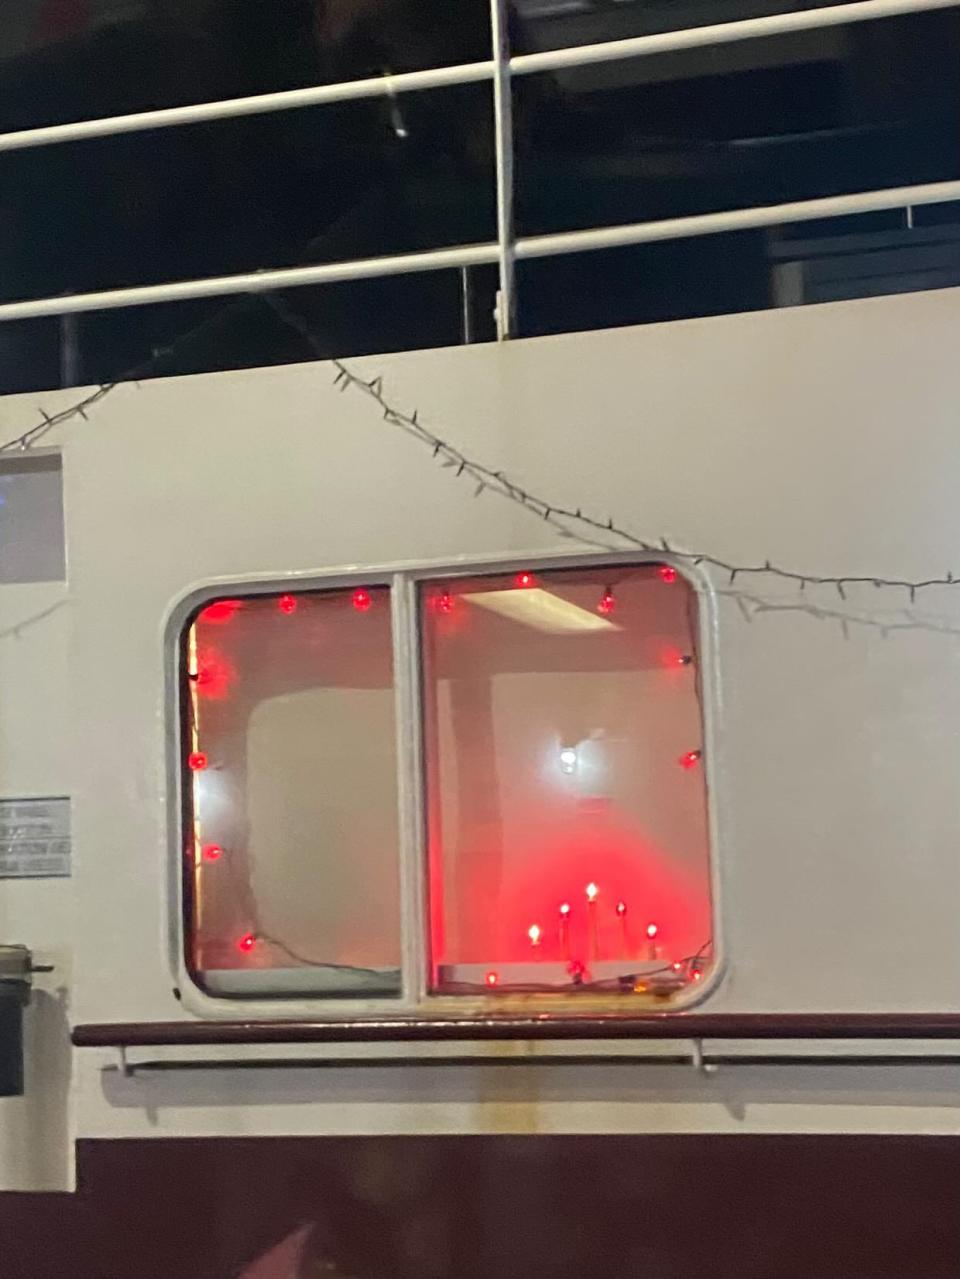 Batt said he received this photo from one of his followers, who said these candles are on display in the Gondola Point Ferry in Kings County, N.B.